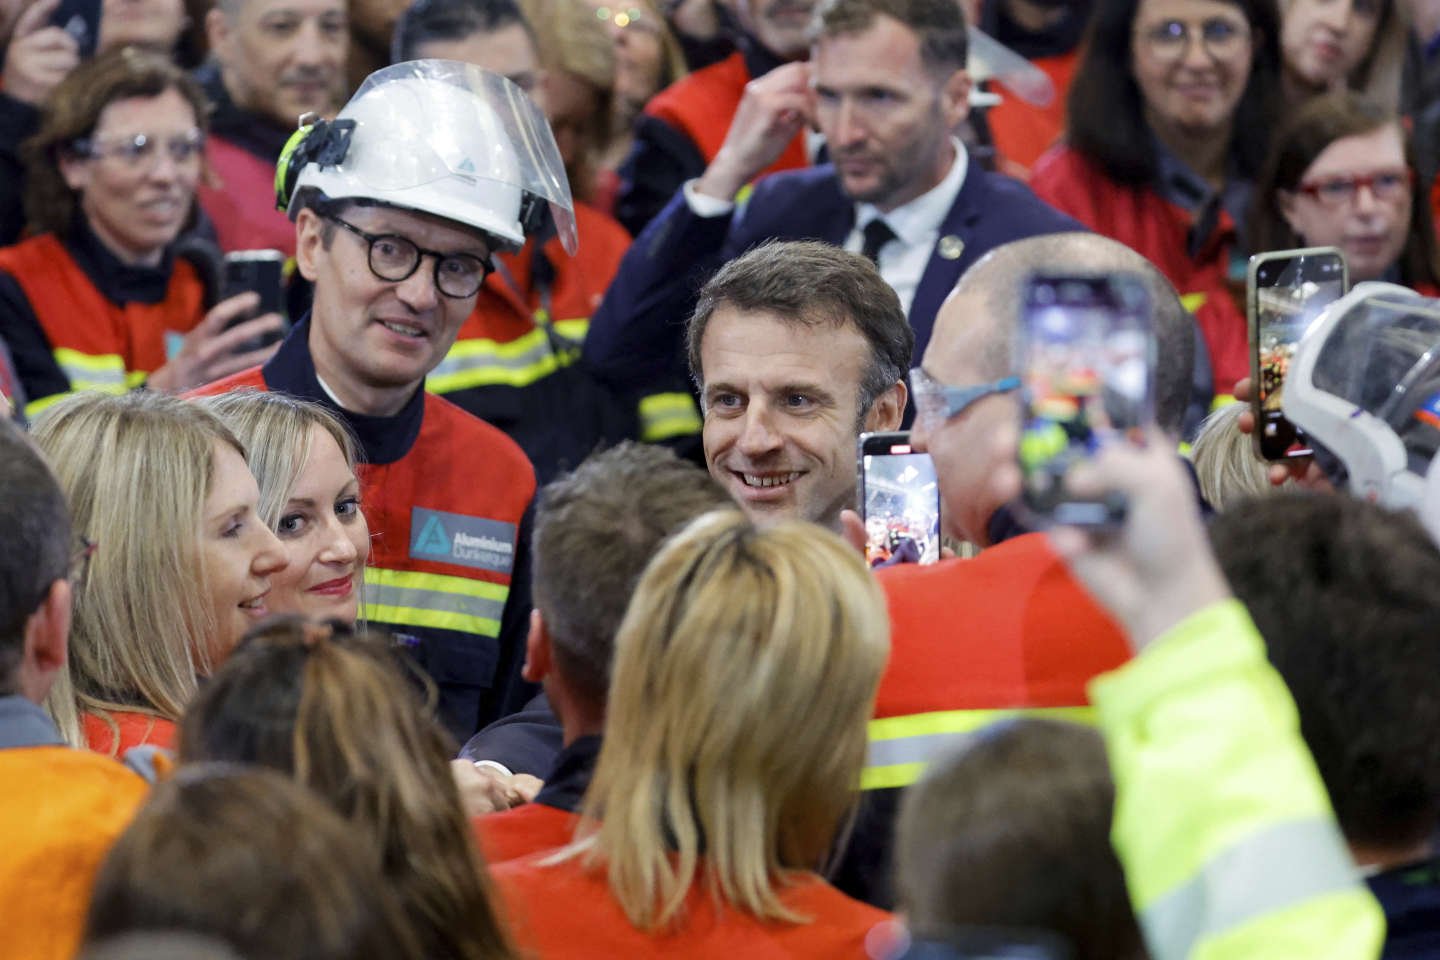 In Dunkirk, Emmanuel Macron wants to show a France that is doing well